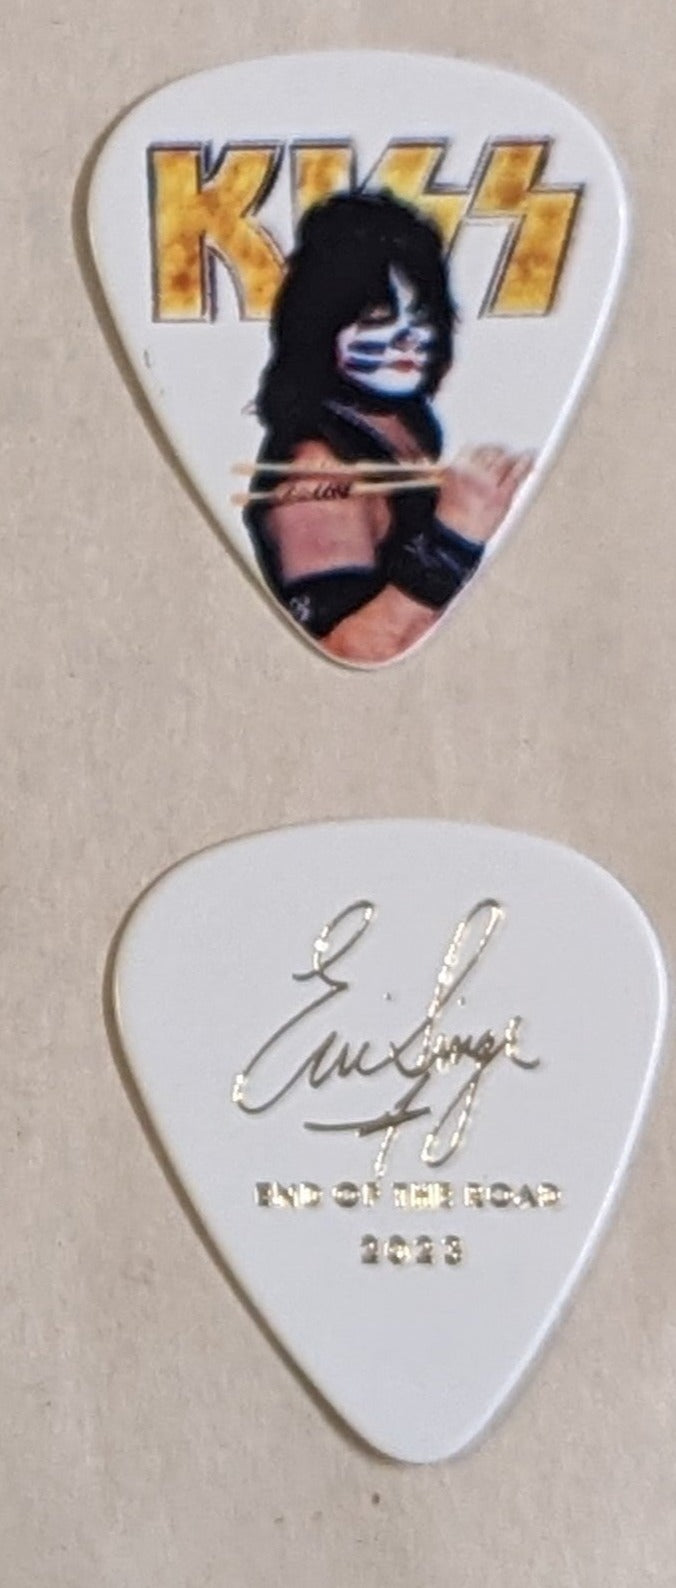 KISS 2023 End of the Road Tour GOLD LOGO INDIVIDUAL PICTURES Guitar Picks